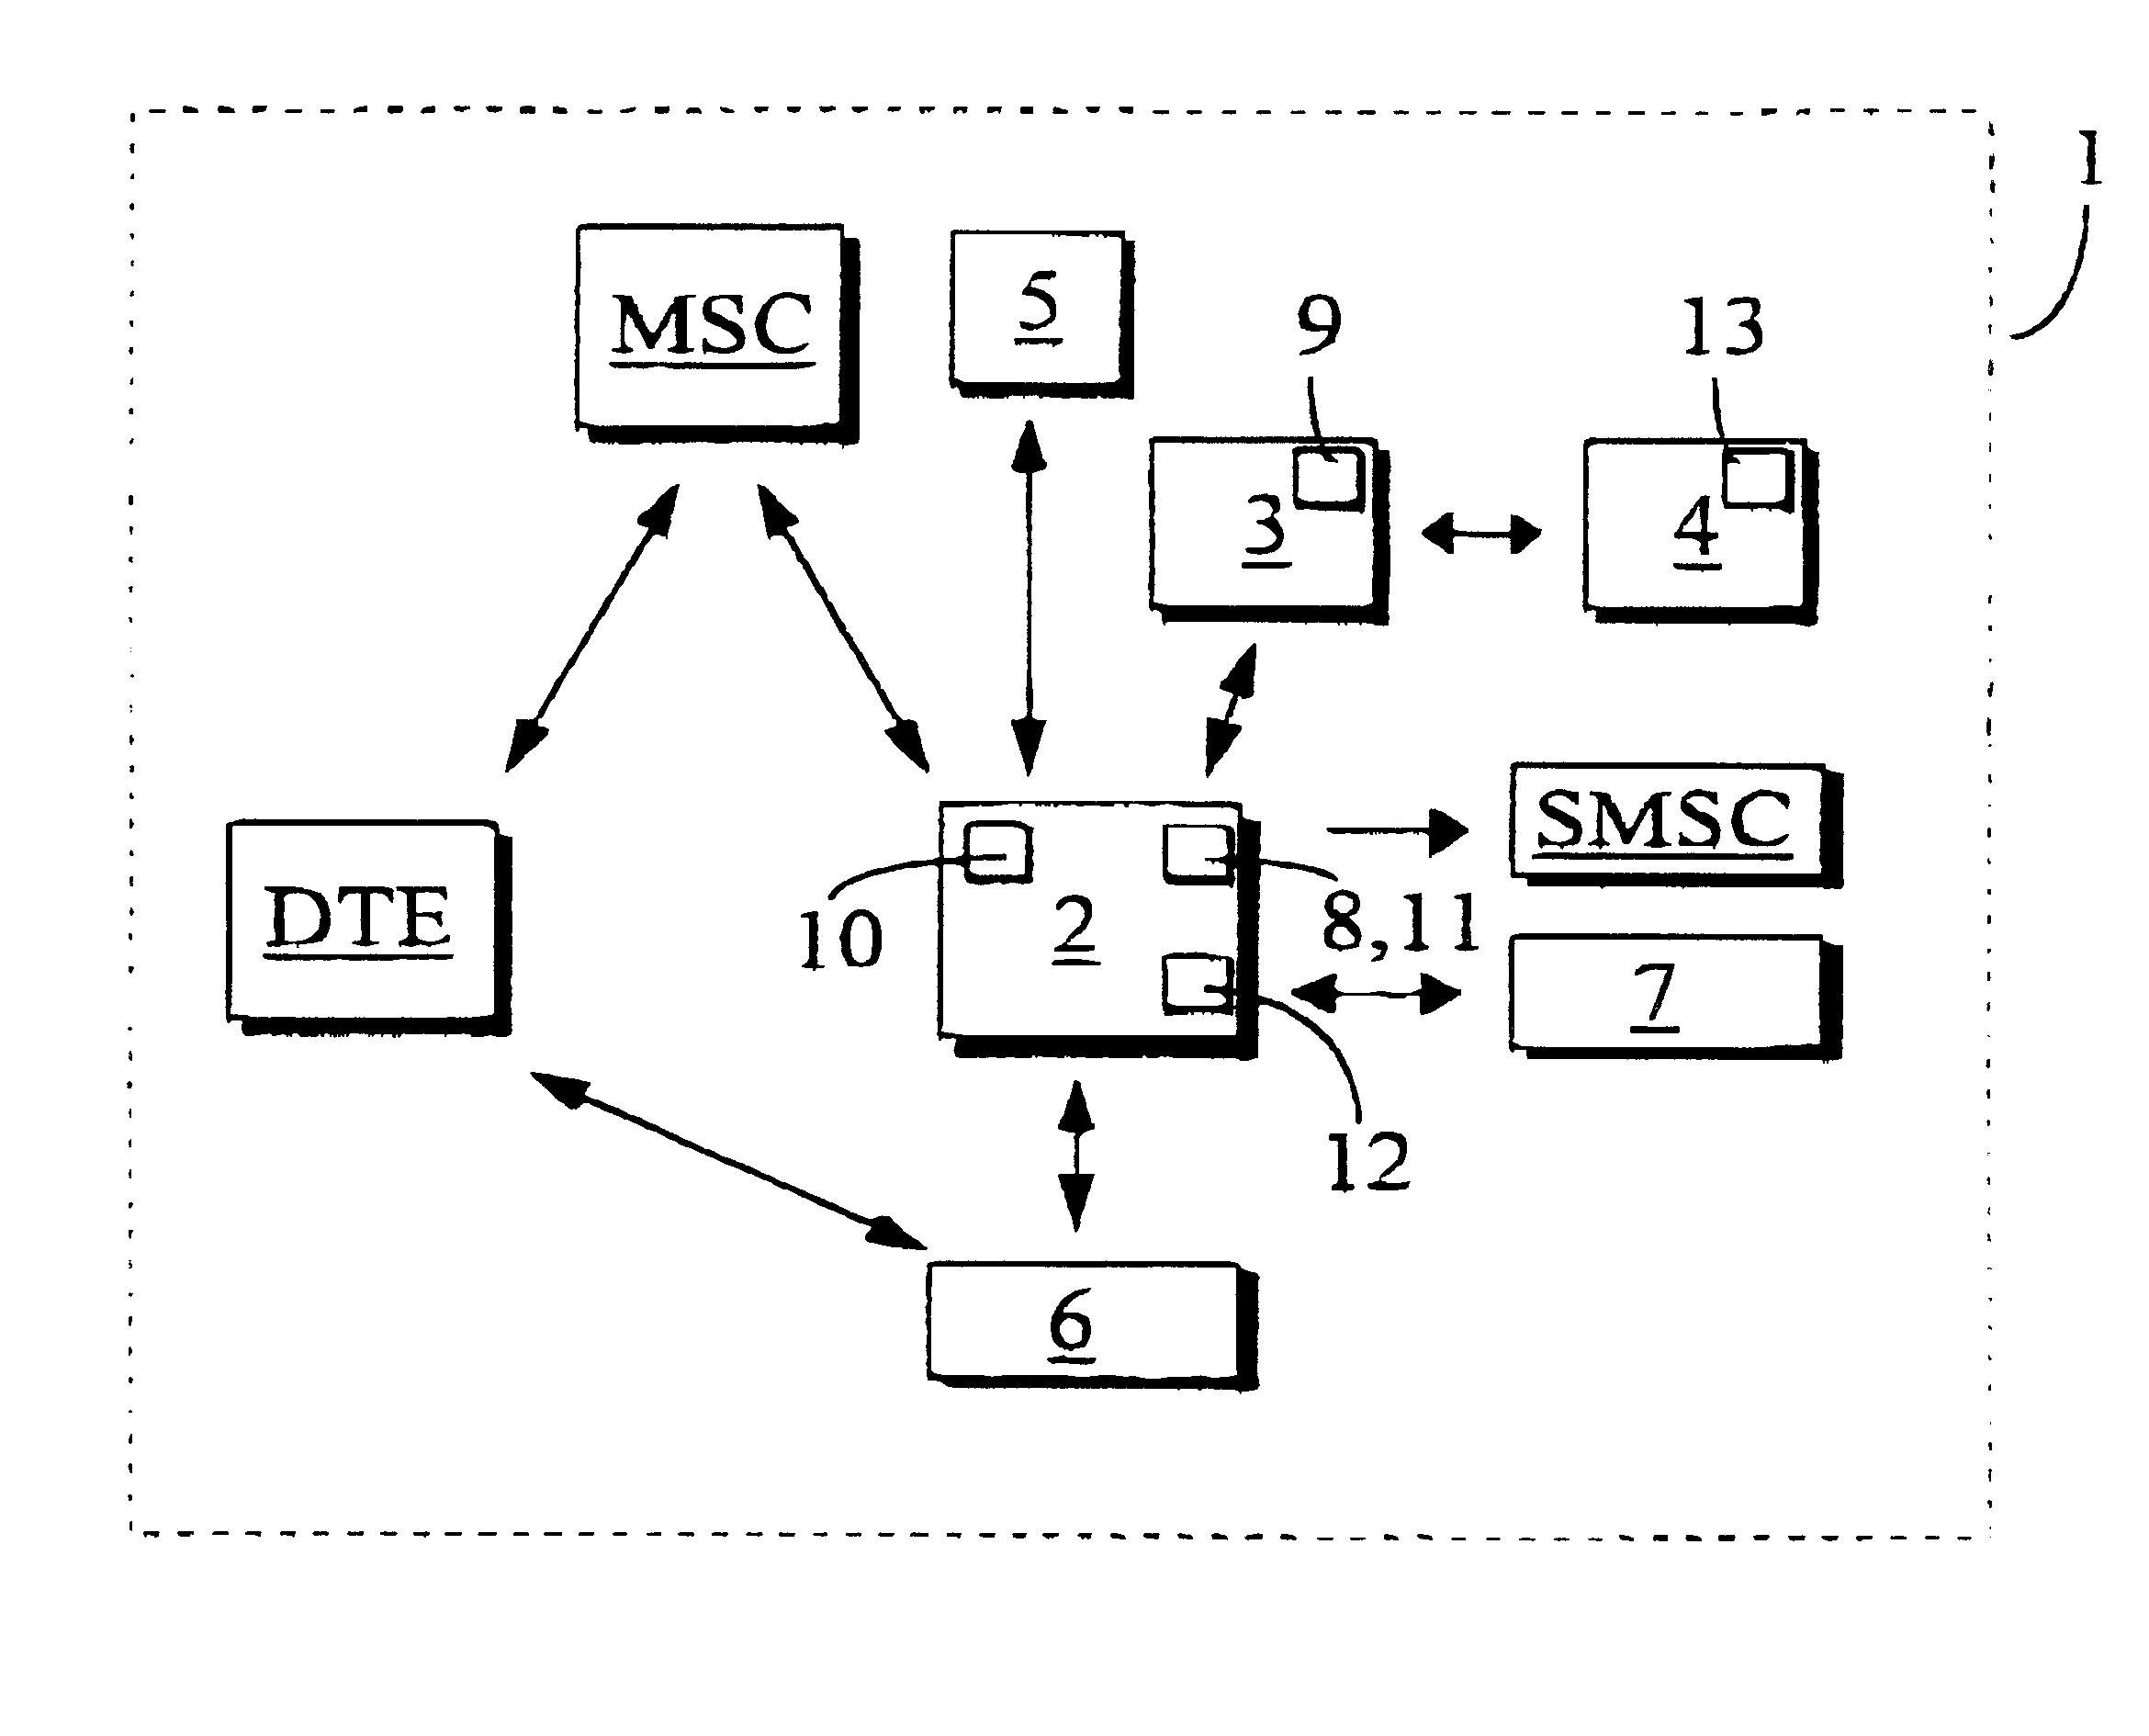 System and method for implementing an automated communication response service